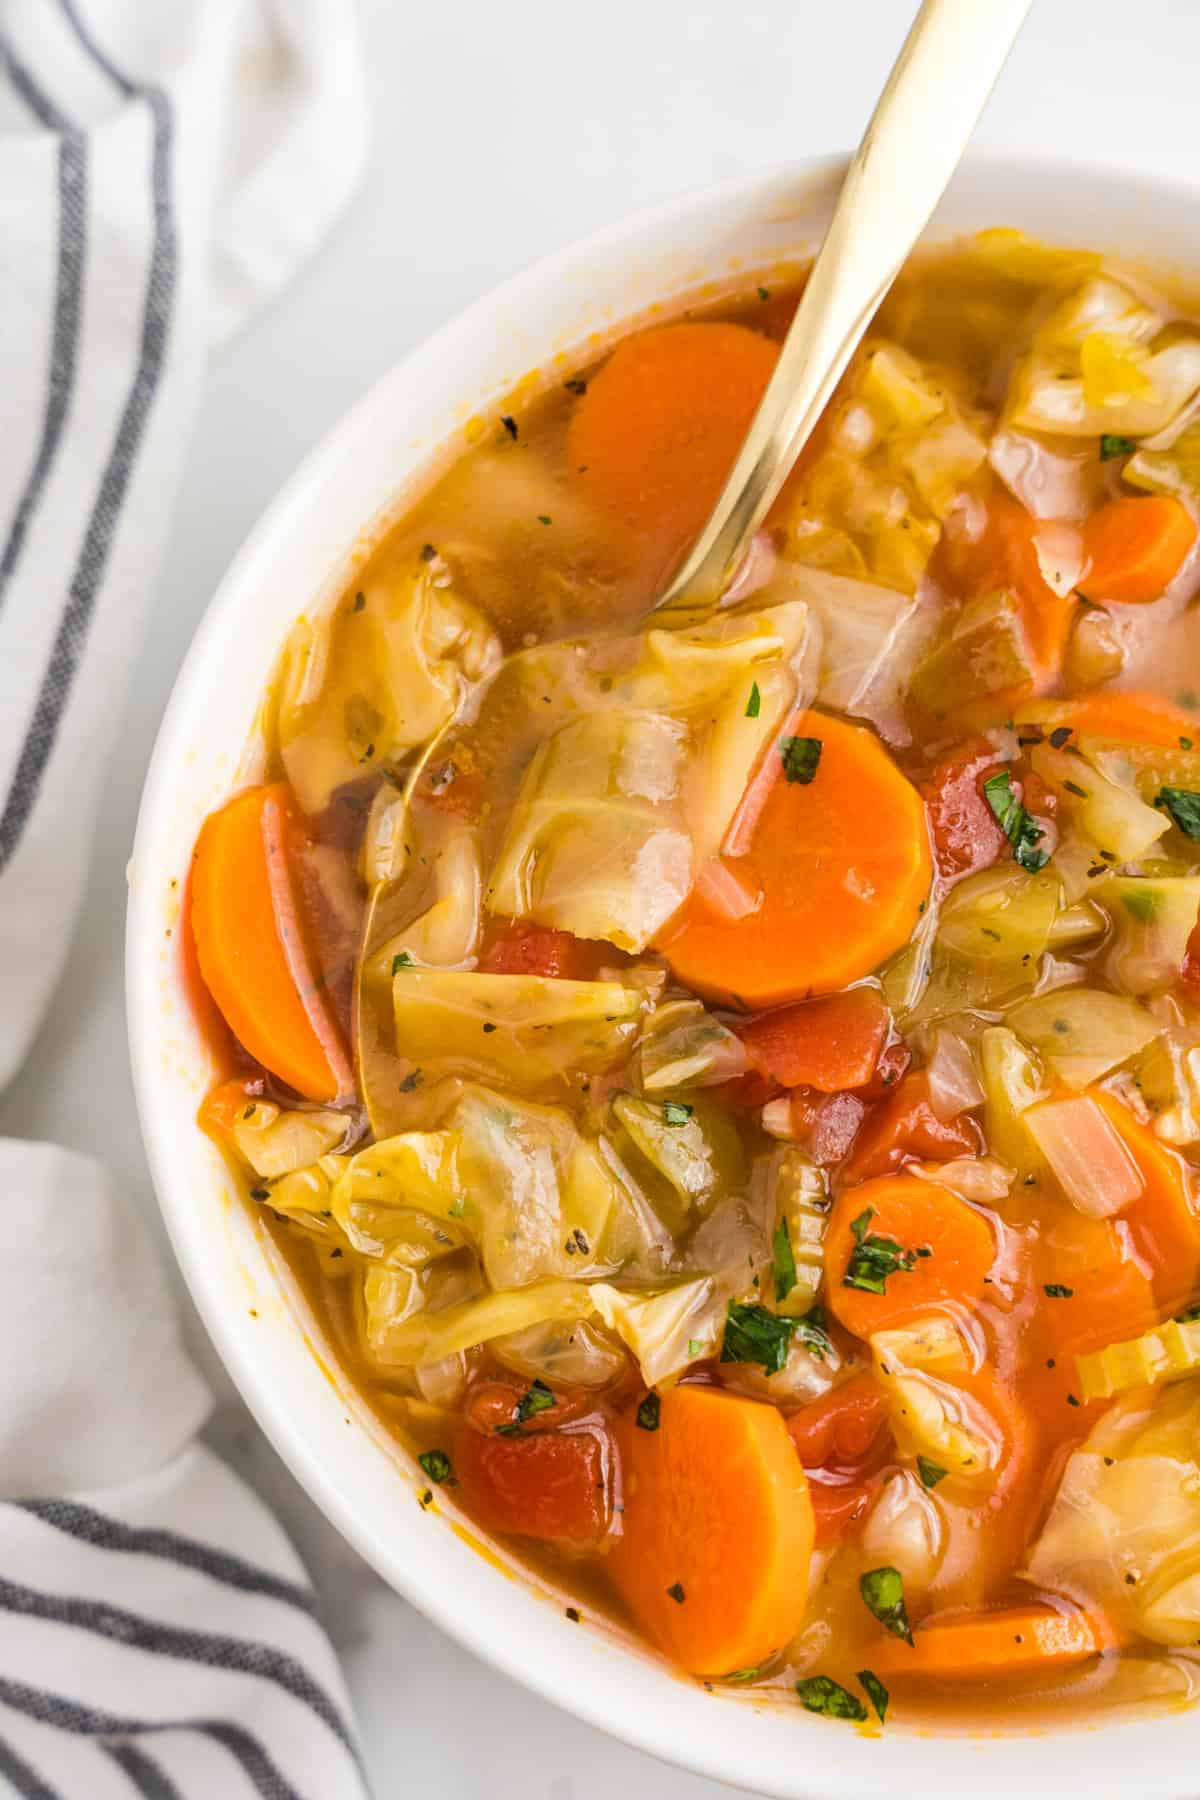 Cabbage Vegetable Soup in bowl with spoon ready to enjoy